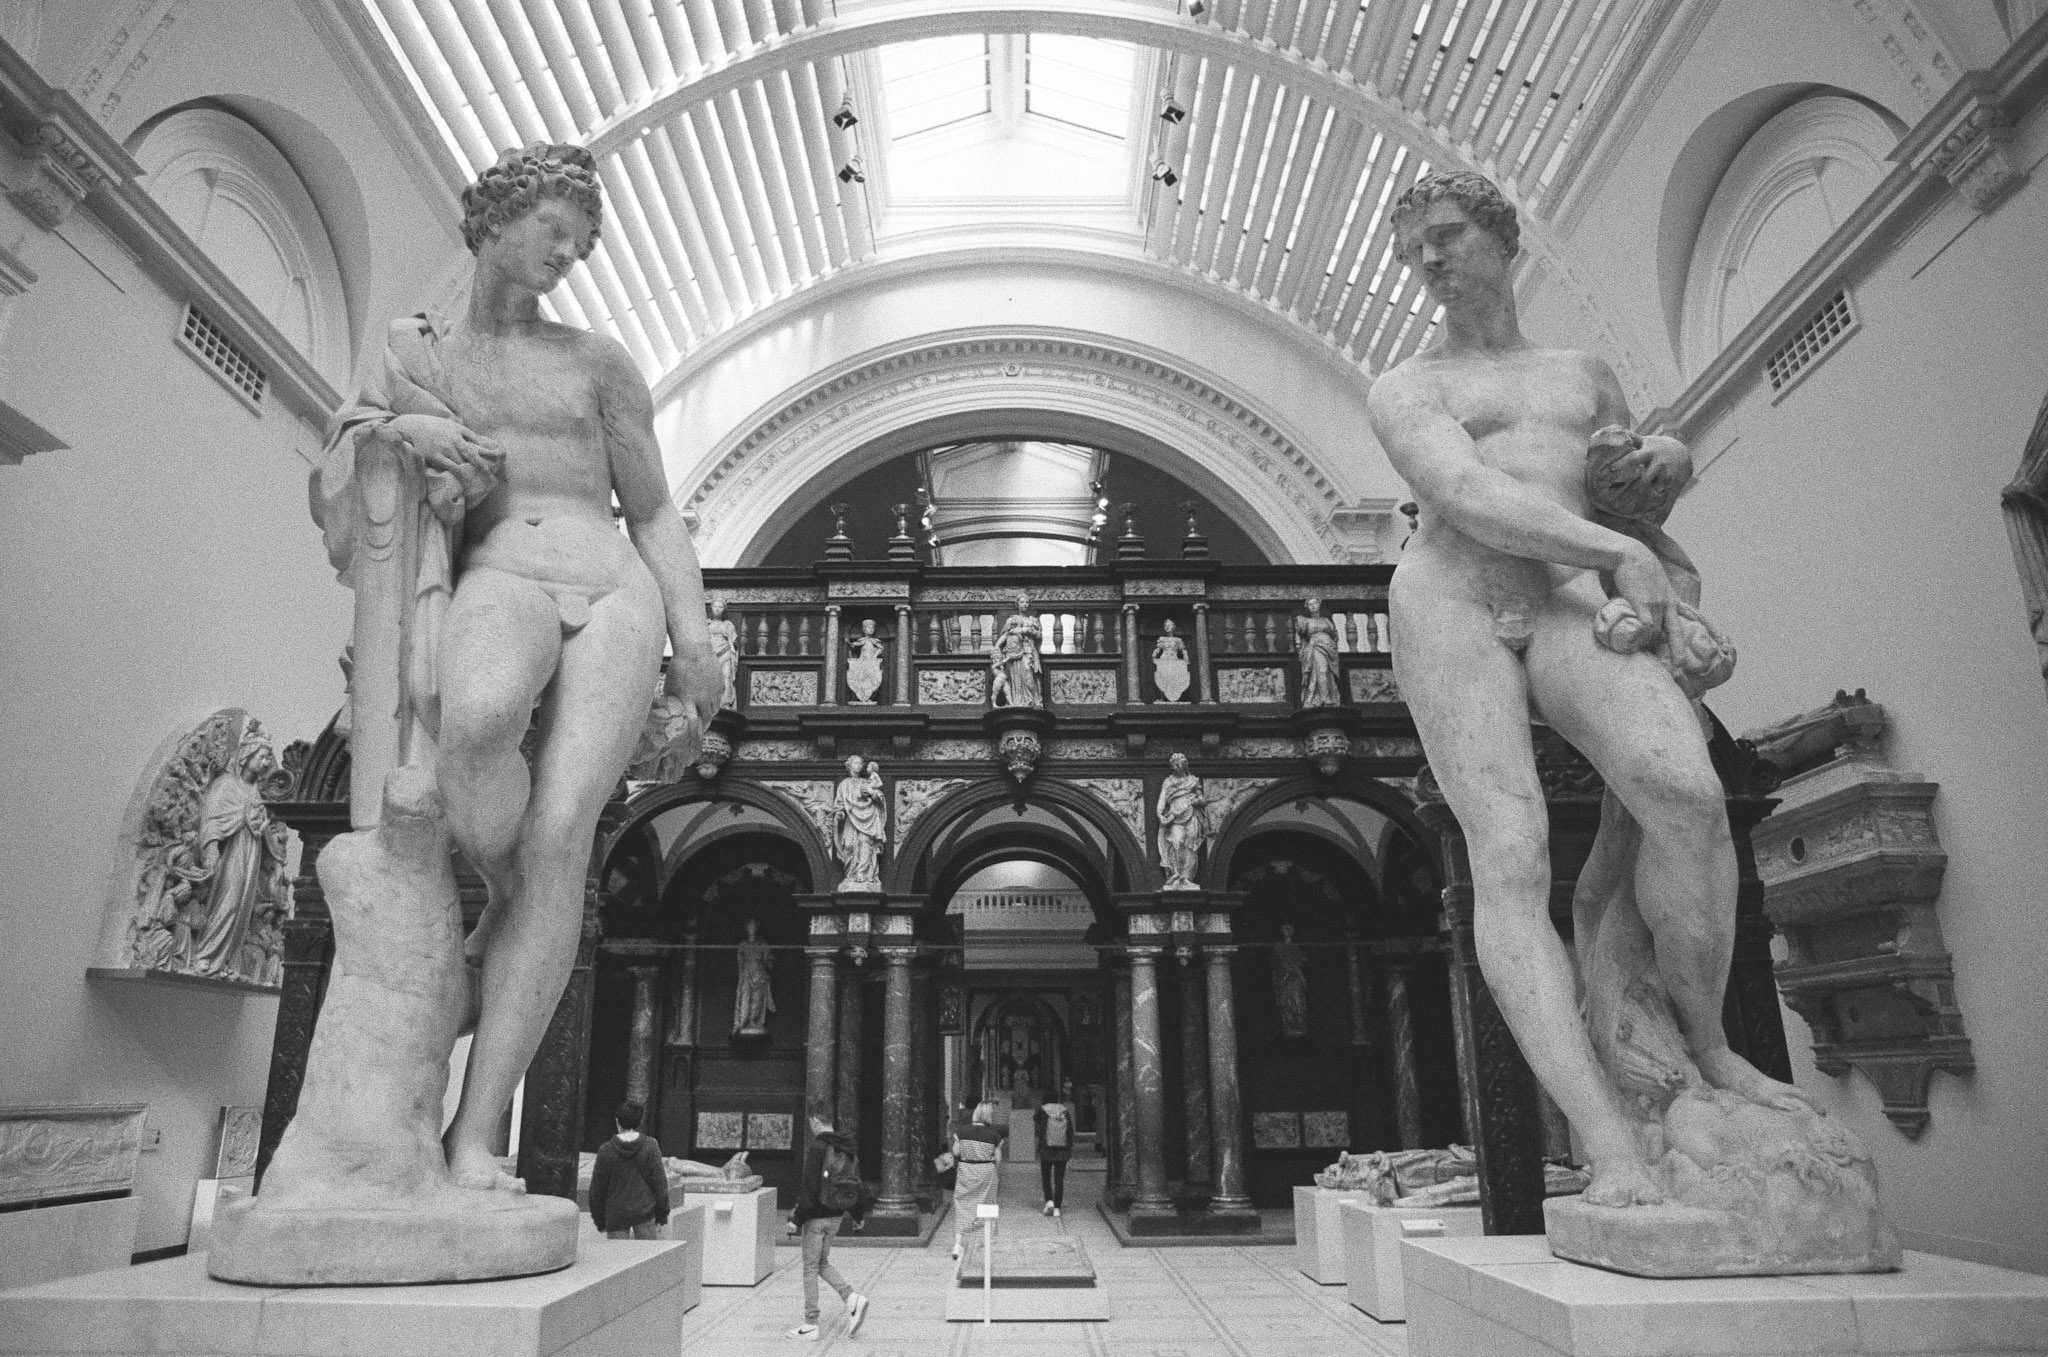 Two large Roman statues in the British Museum